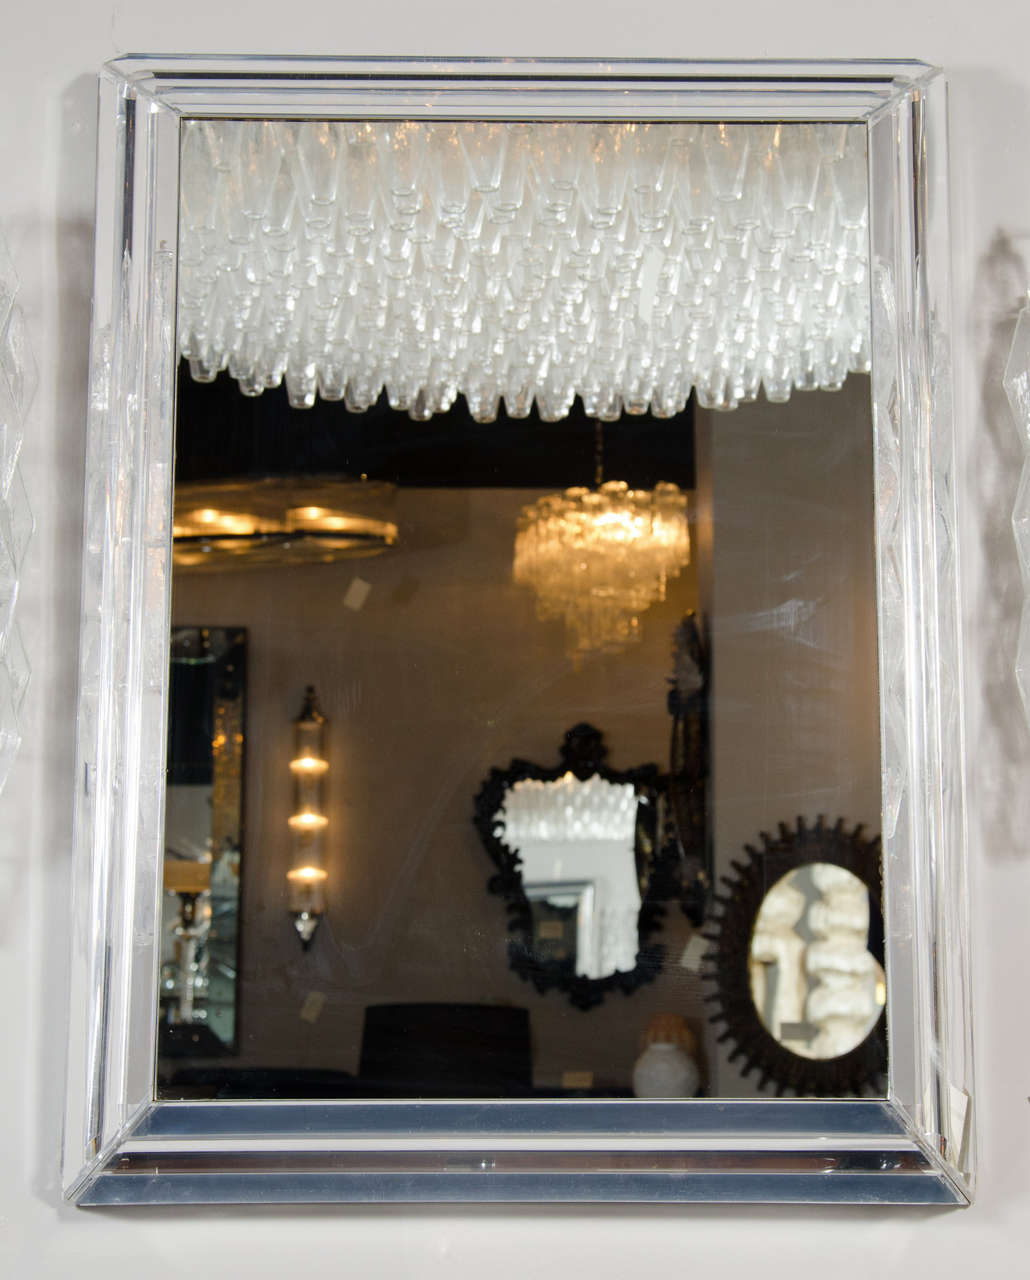 This Mid-Century Skyscraper style mirror is bordered in three rows of mirror-backed lucite rods in a stepped formation creating an interesting visual effect. It can be hung both horizontally and vertically.